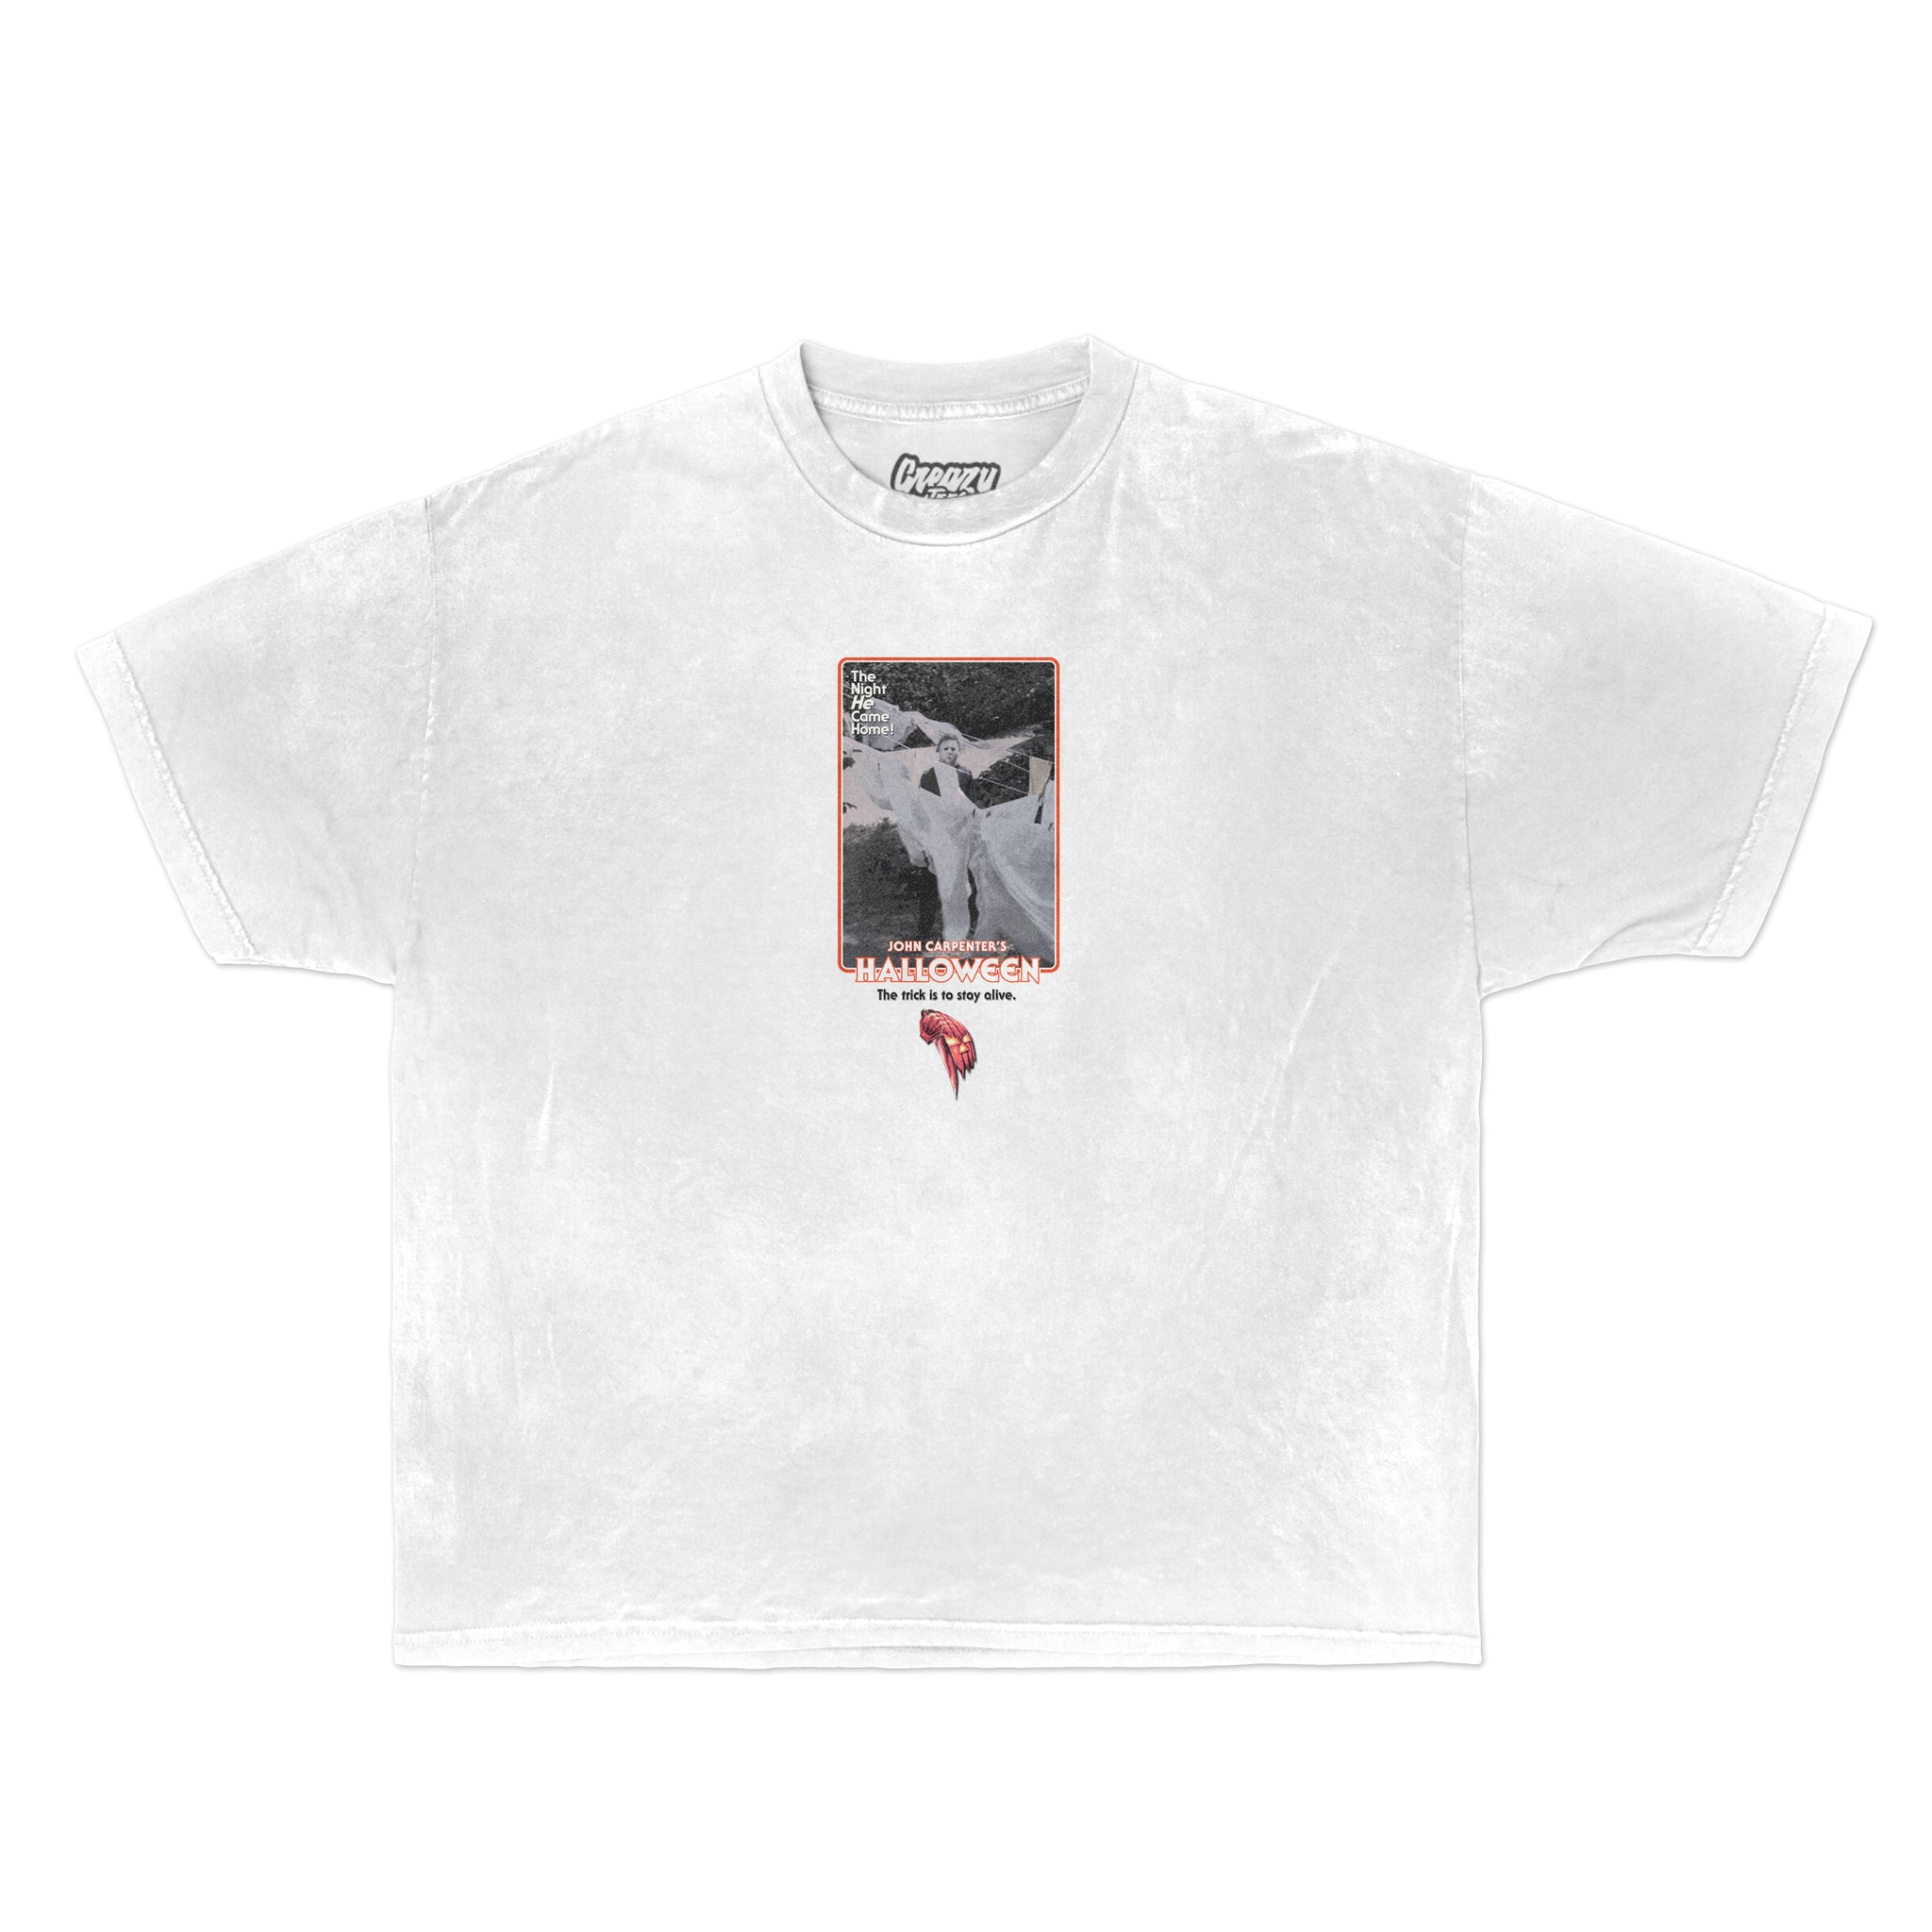 Michael Myers Tee v2 Tee Greazy Tees XS White Oversized